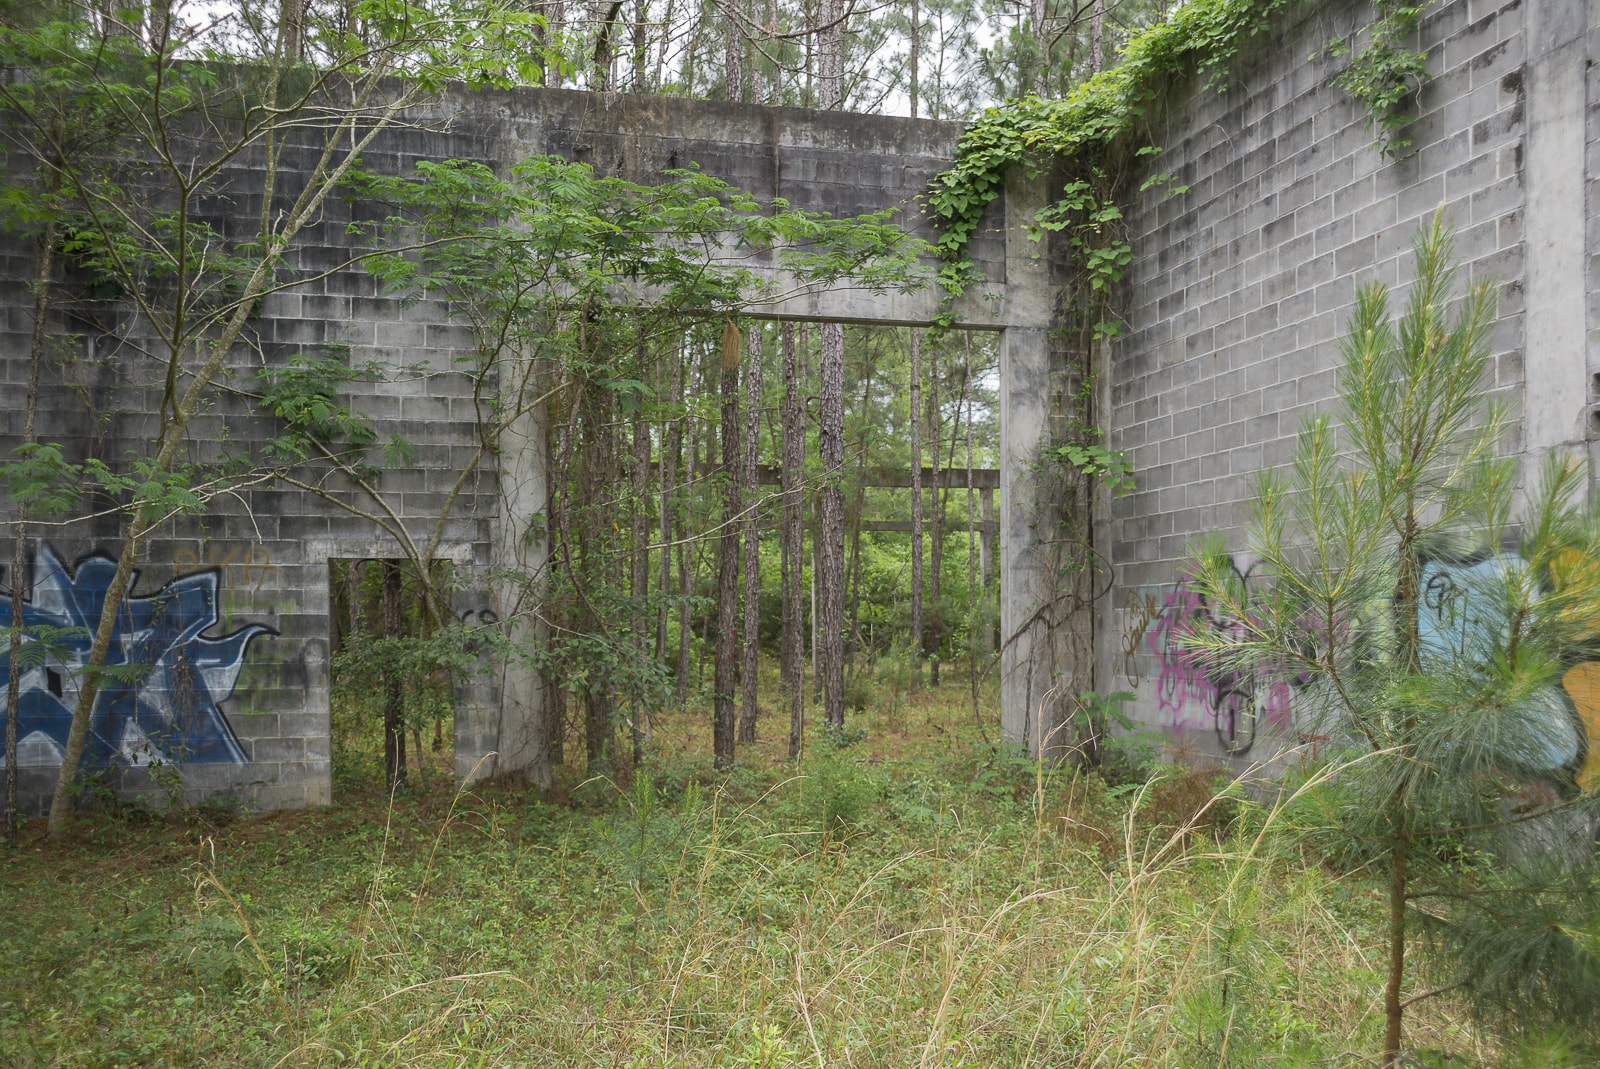 Abandoned Warehouse Urban Exploration In A Florida Pine Forest